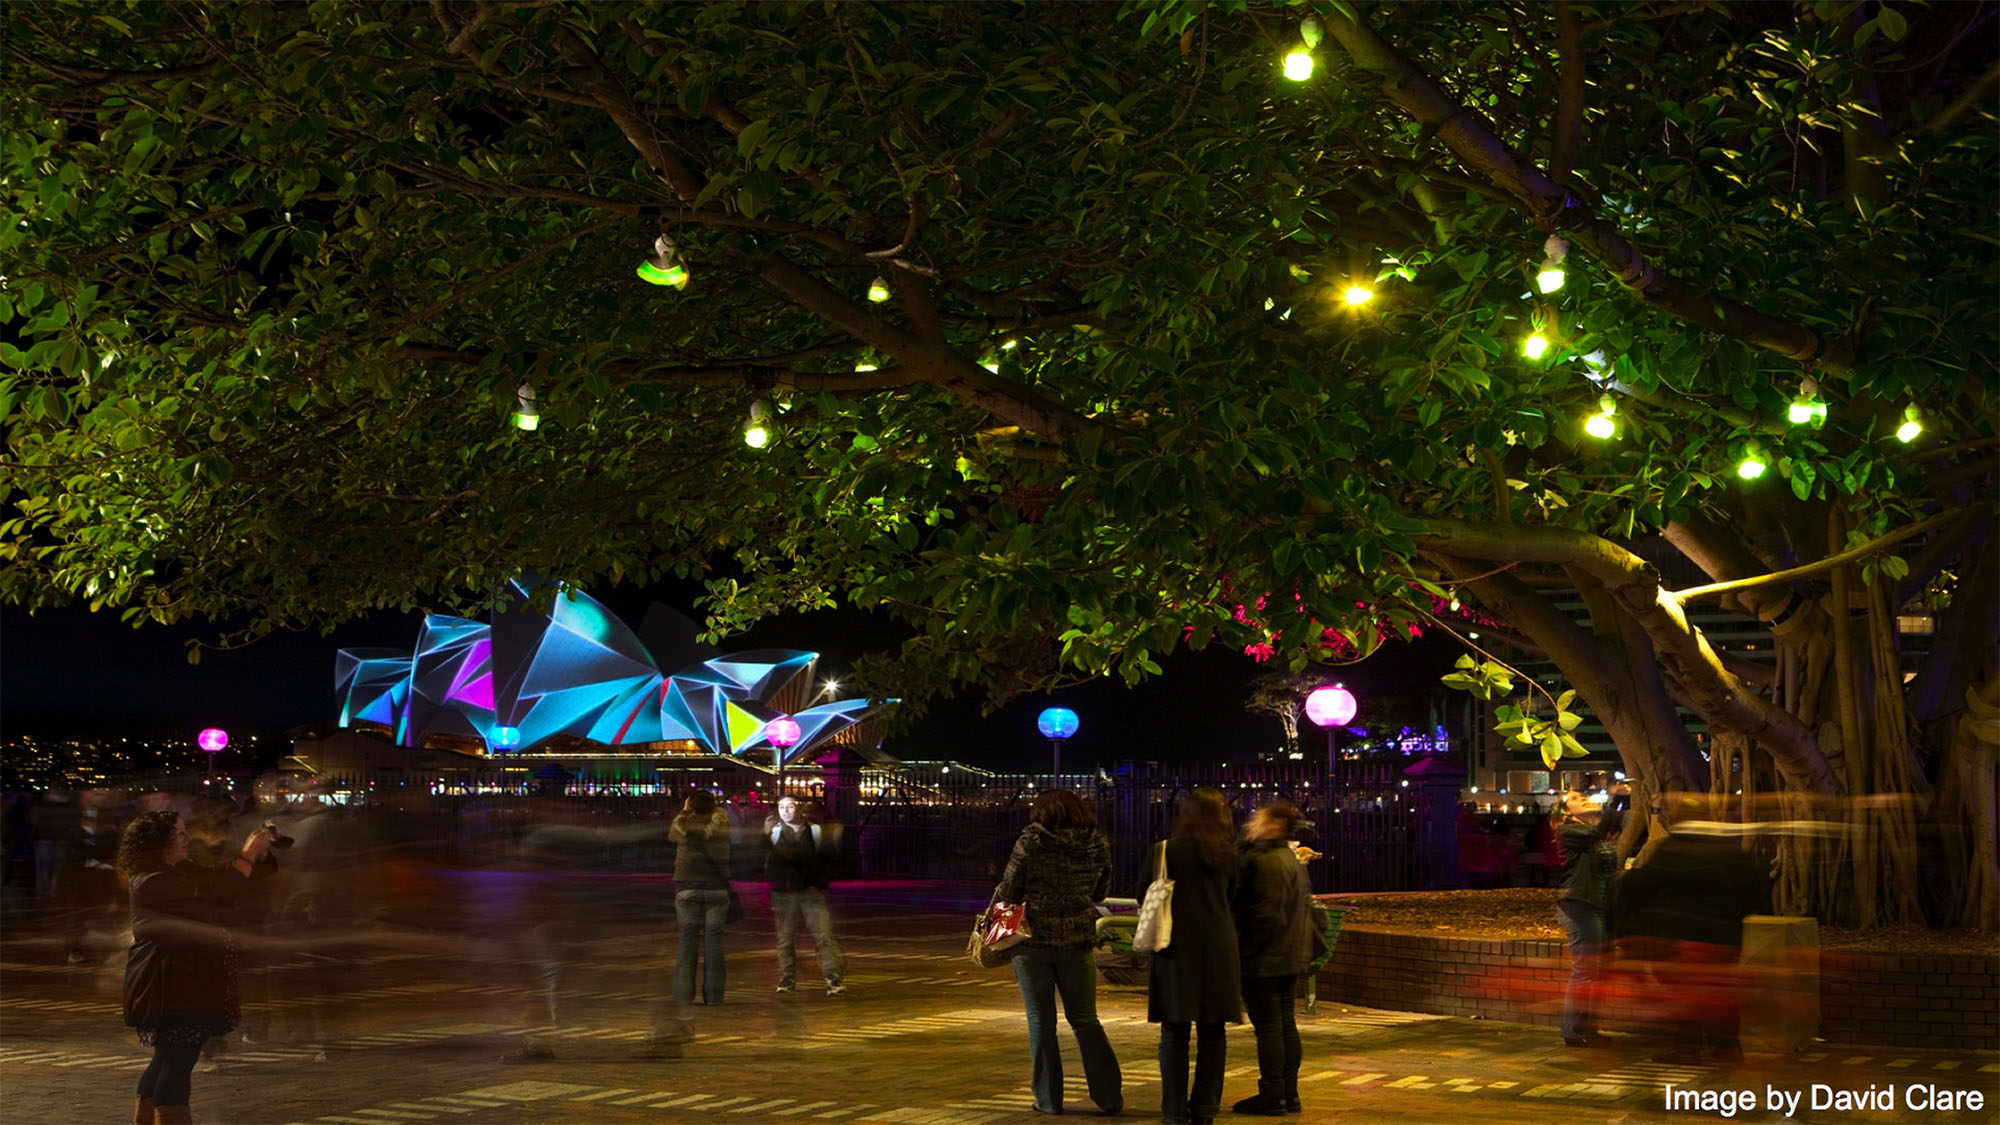 Social Firefly is an artwork of 50 autonomous light robots, exhibited during Vivid Sydney 2011. Photo: David Clare